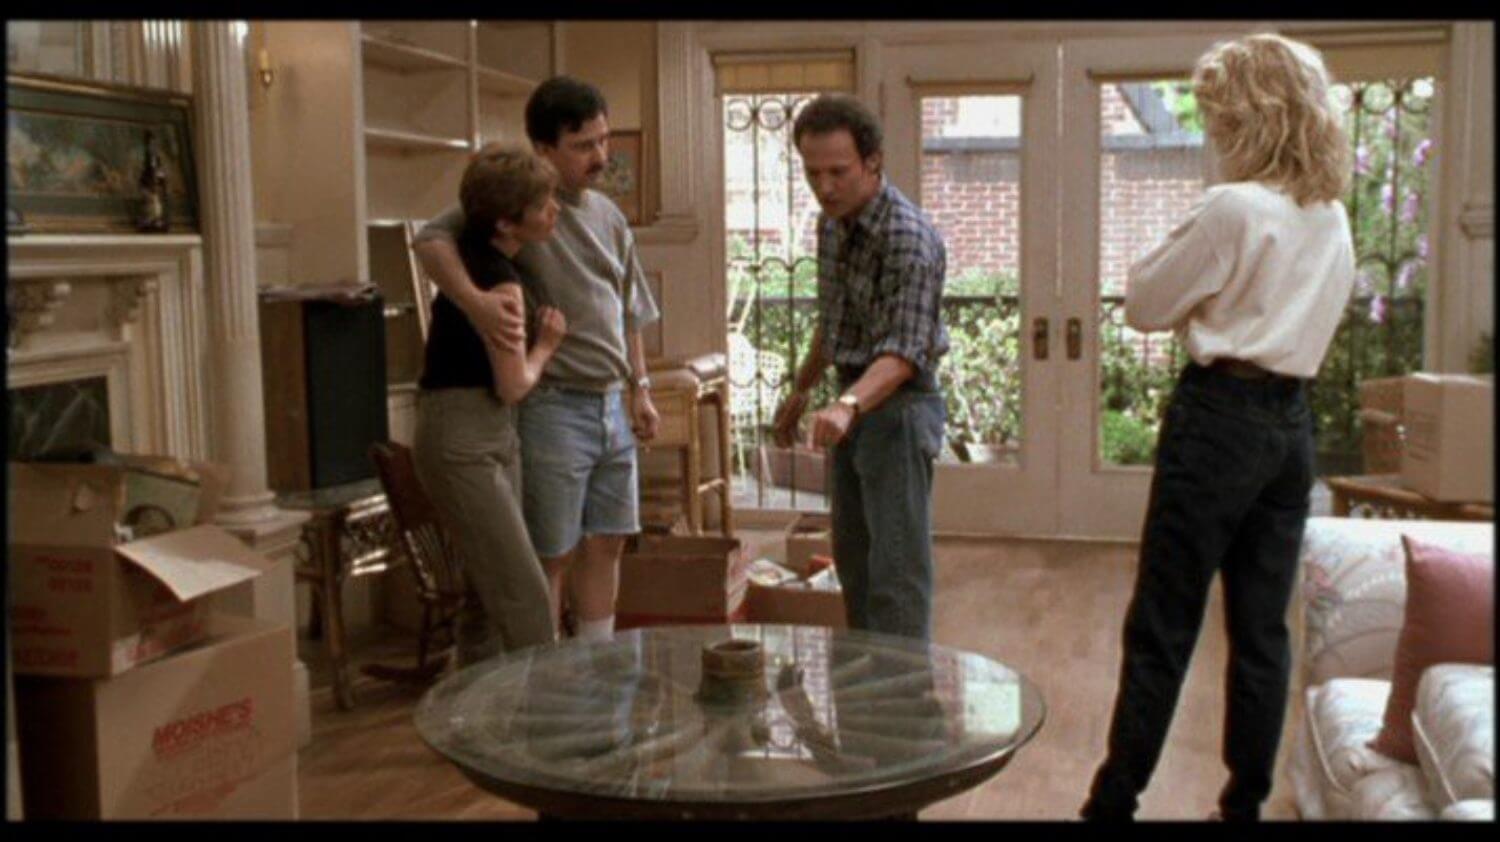 House of Jess and Marie - When Harry met Sally